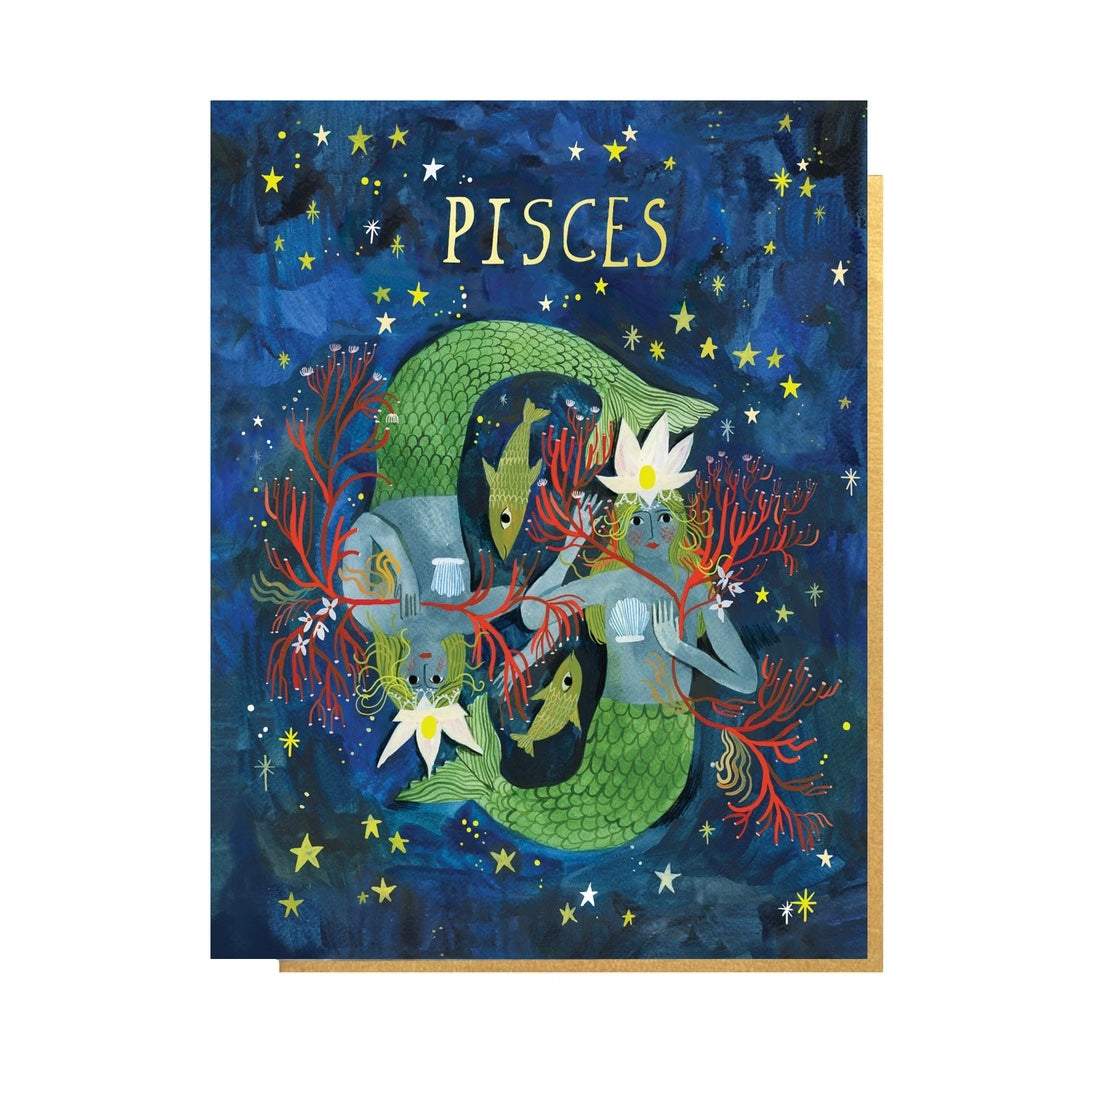 Folding card with illustration of two mermaids intertwined with fish and coral Pisces written above